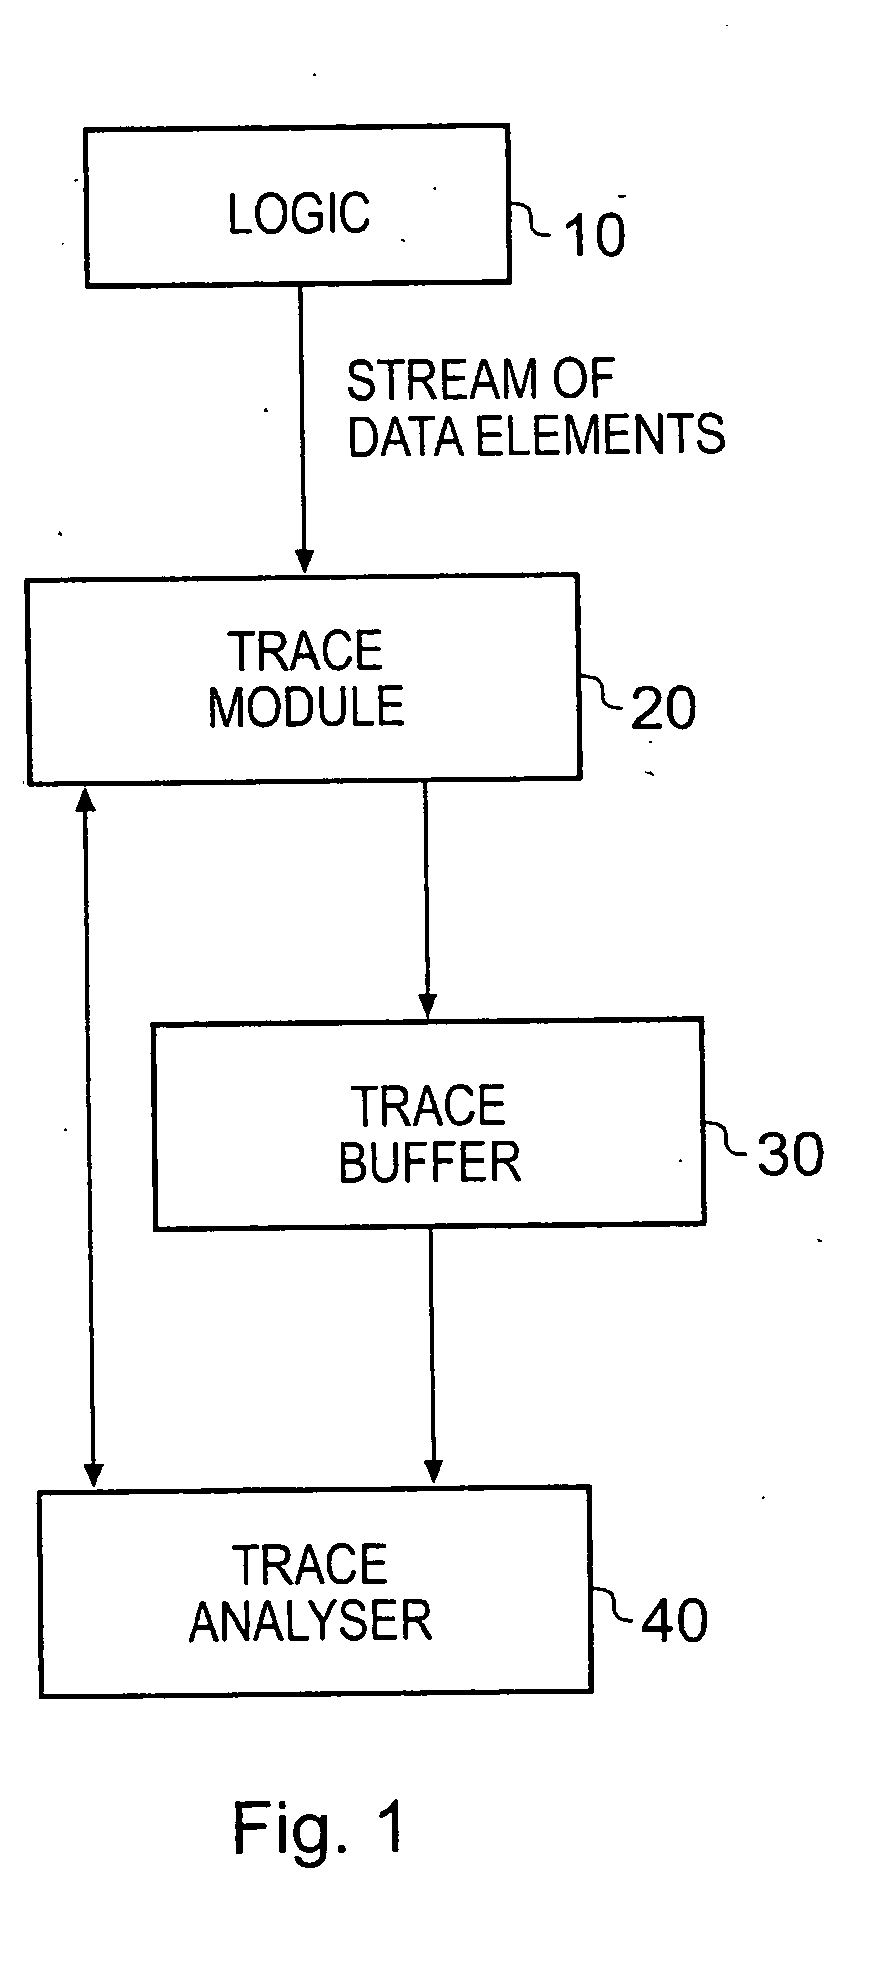 Generation of trace elements within a data processing apparatus